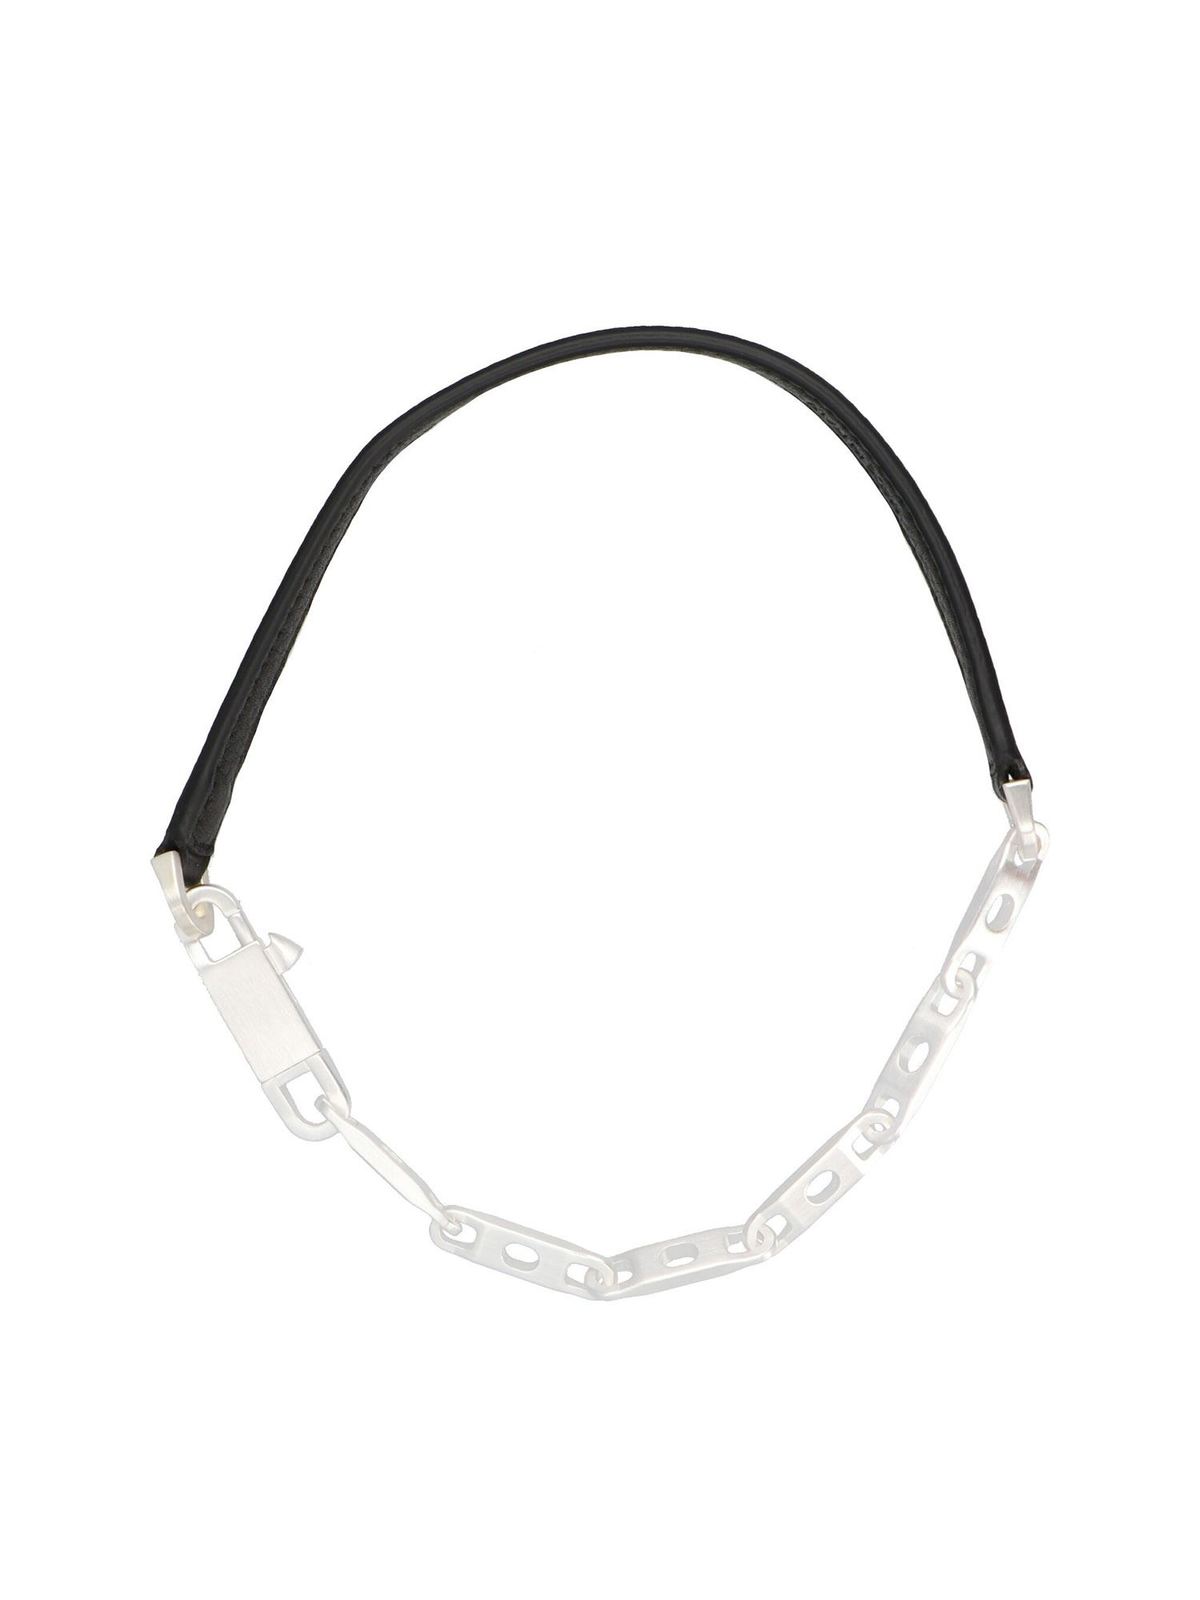 RICK OWENS CHAIN CHOKER NECKLACE IN BLACK AND SILVER